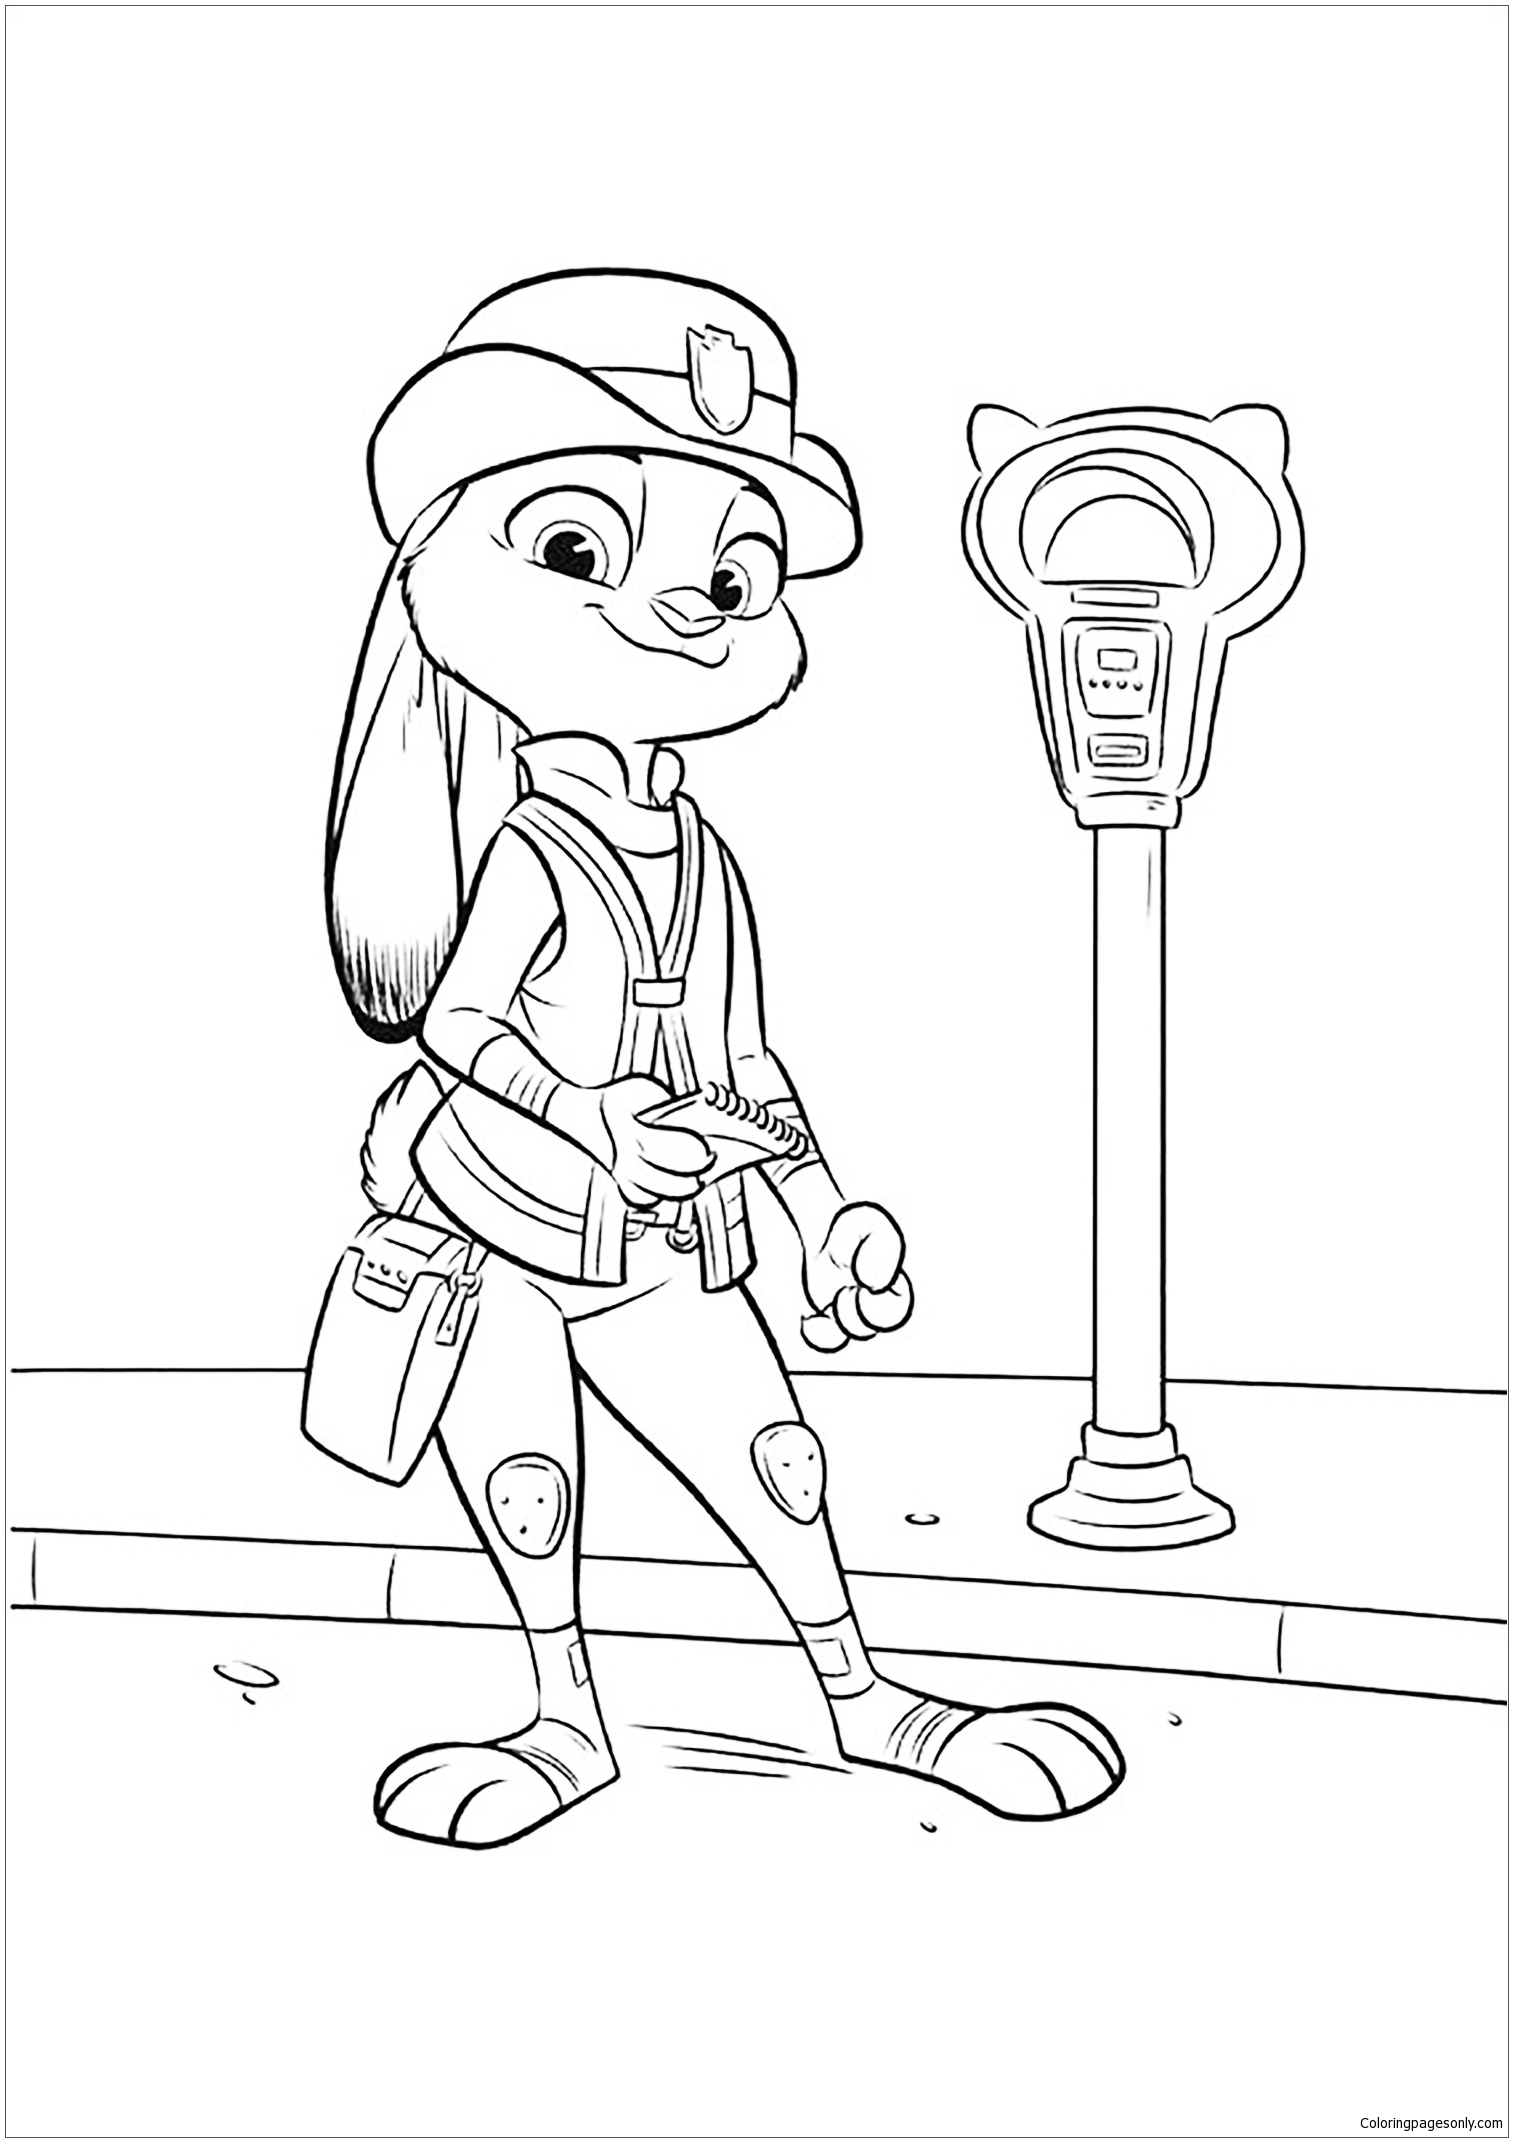 Download Zootopia 8 Coloring Page - Free Coloring Pages Online